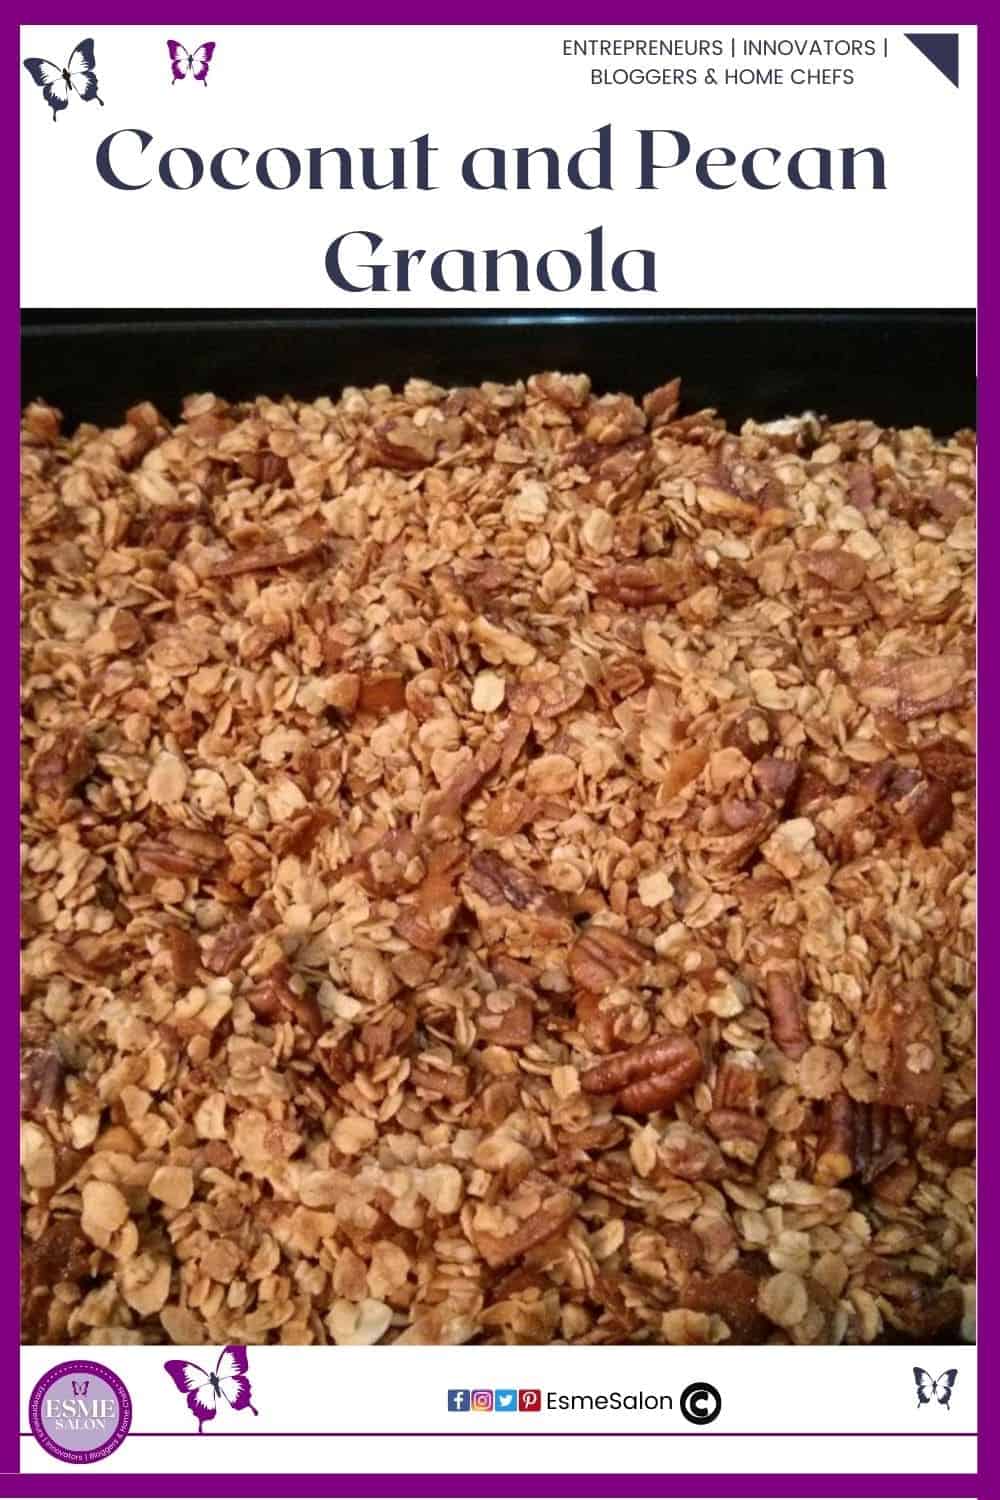 an image of a baking tray filled with Coconut and Pecan Granola